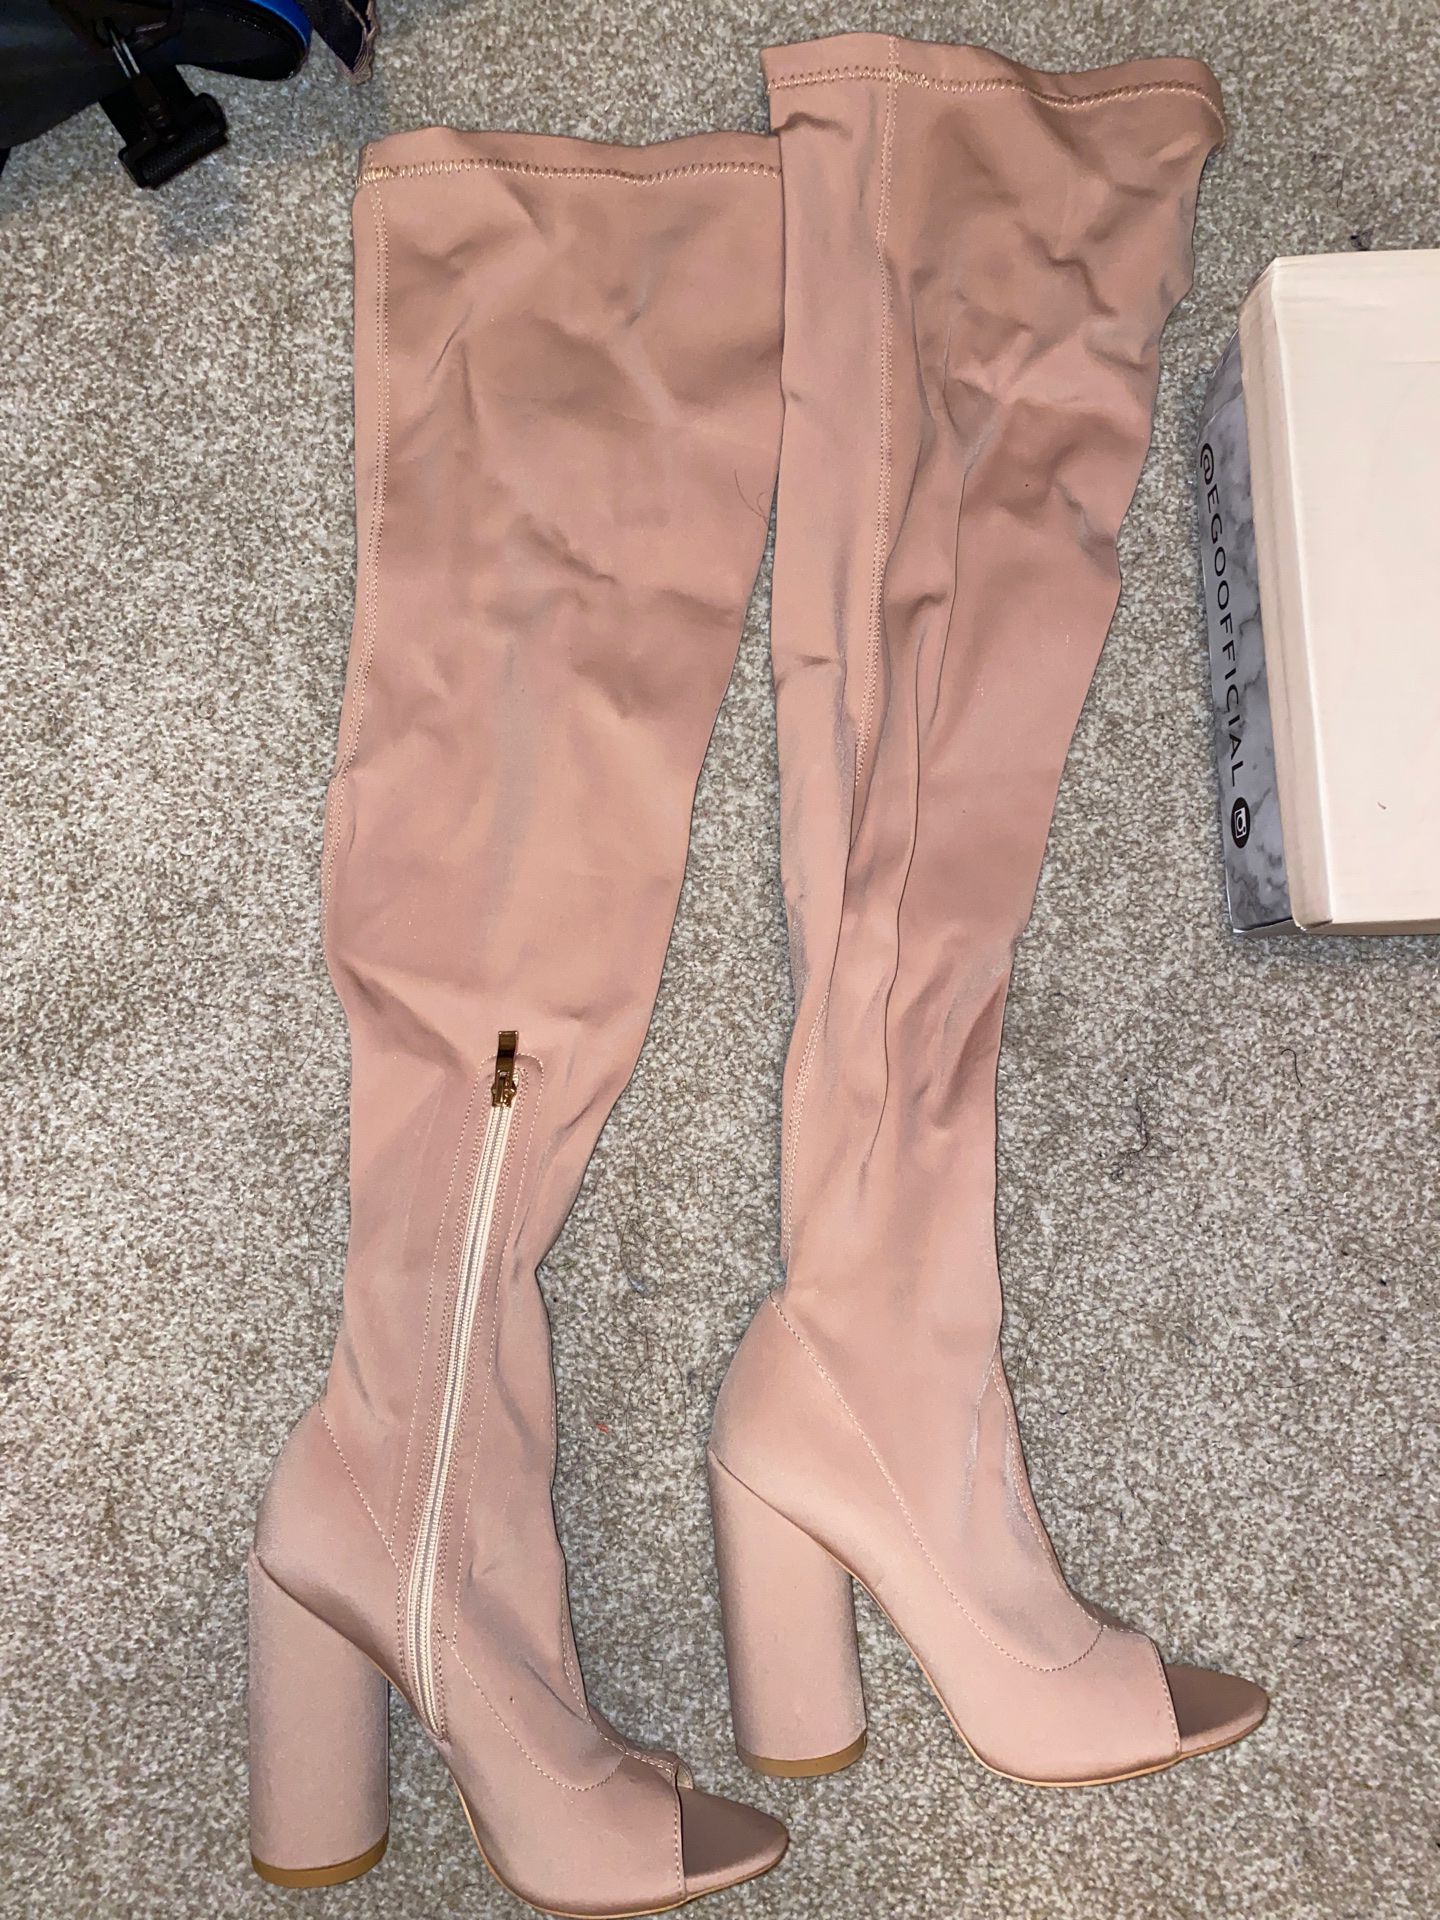 EGO nude lyrca thigh highs boots